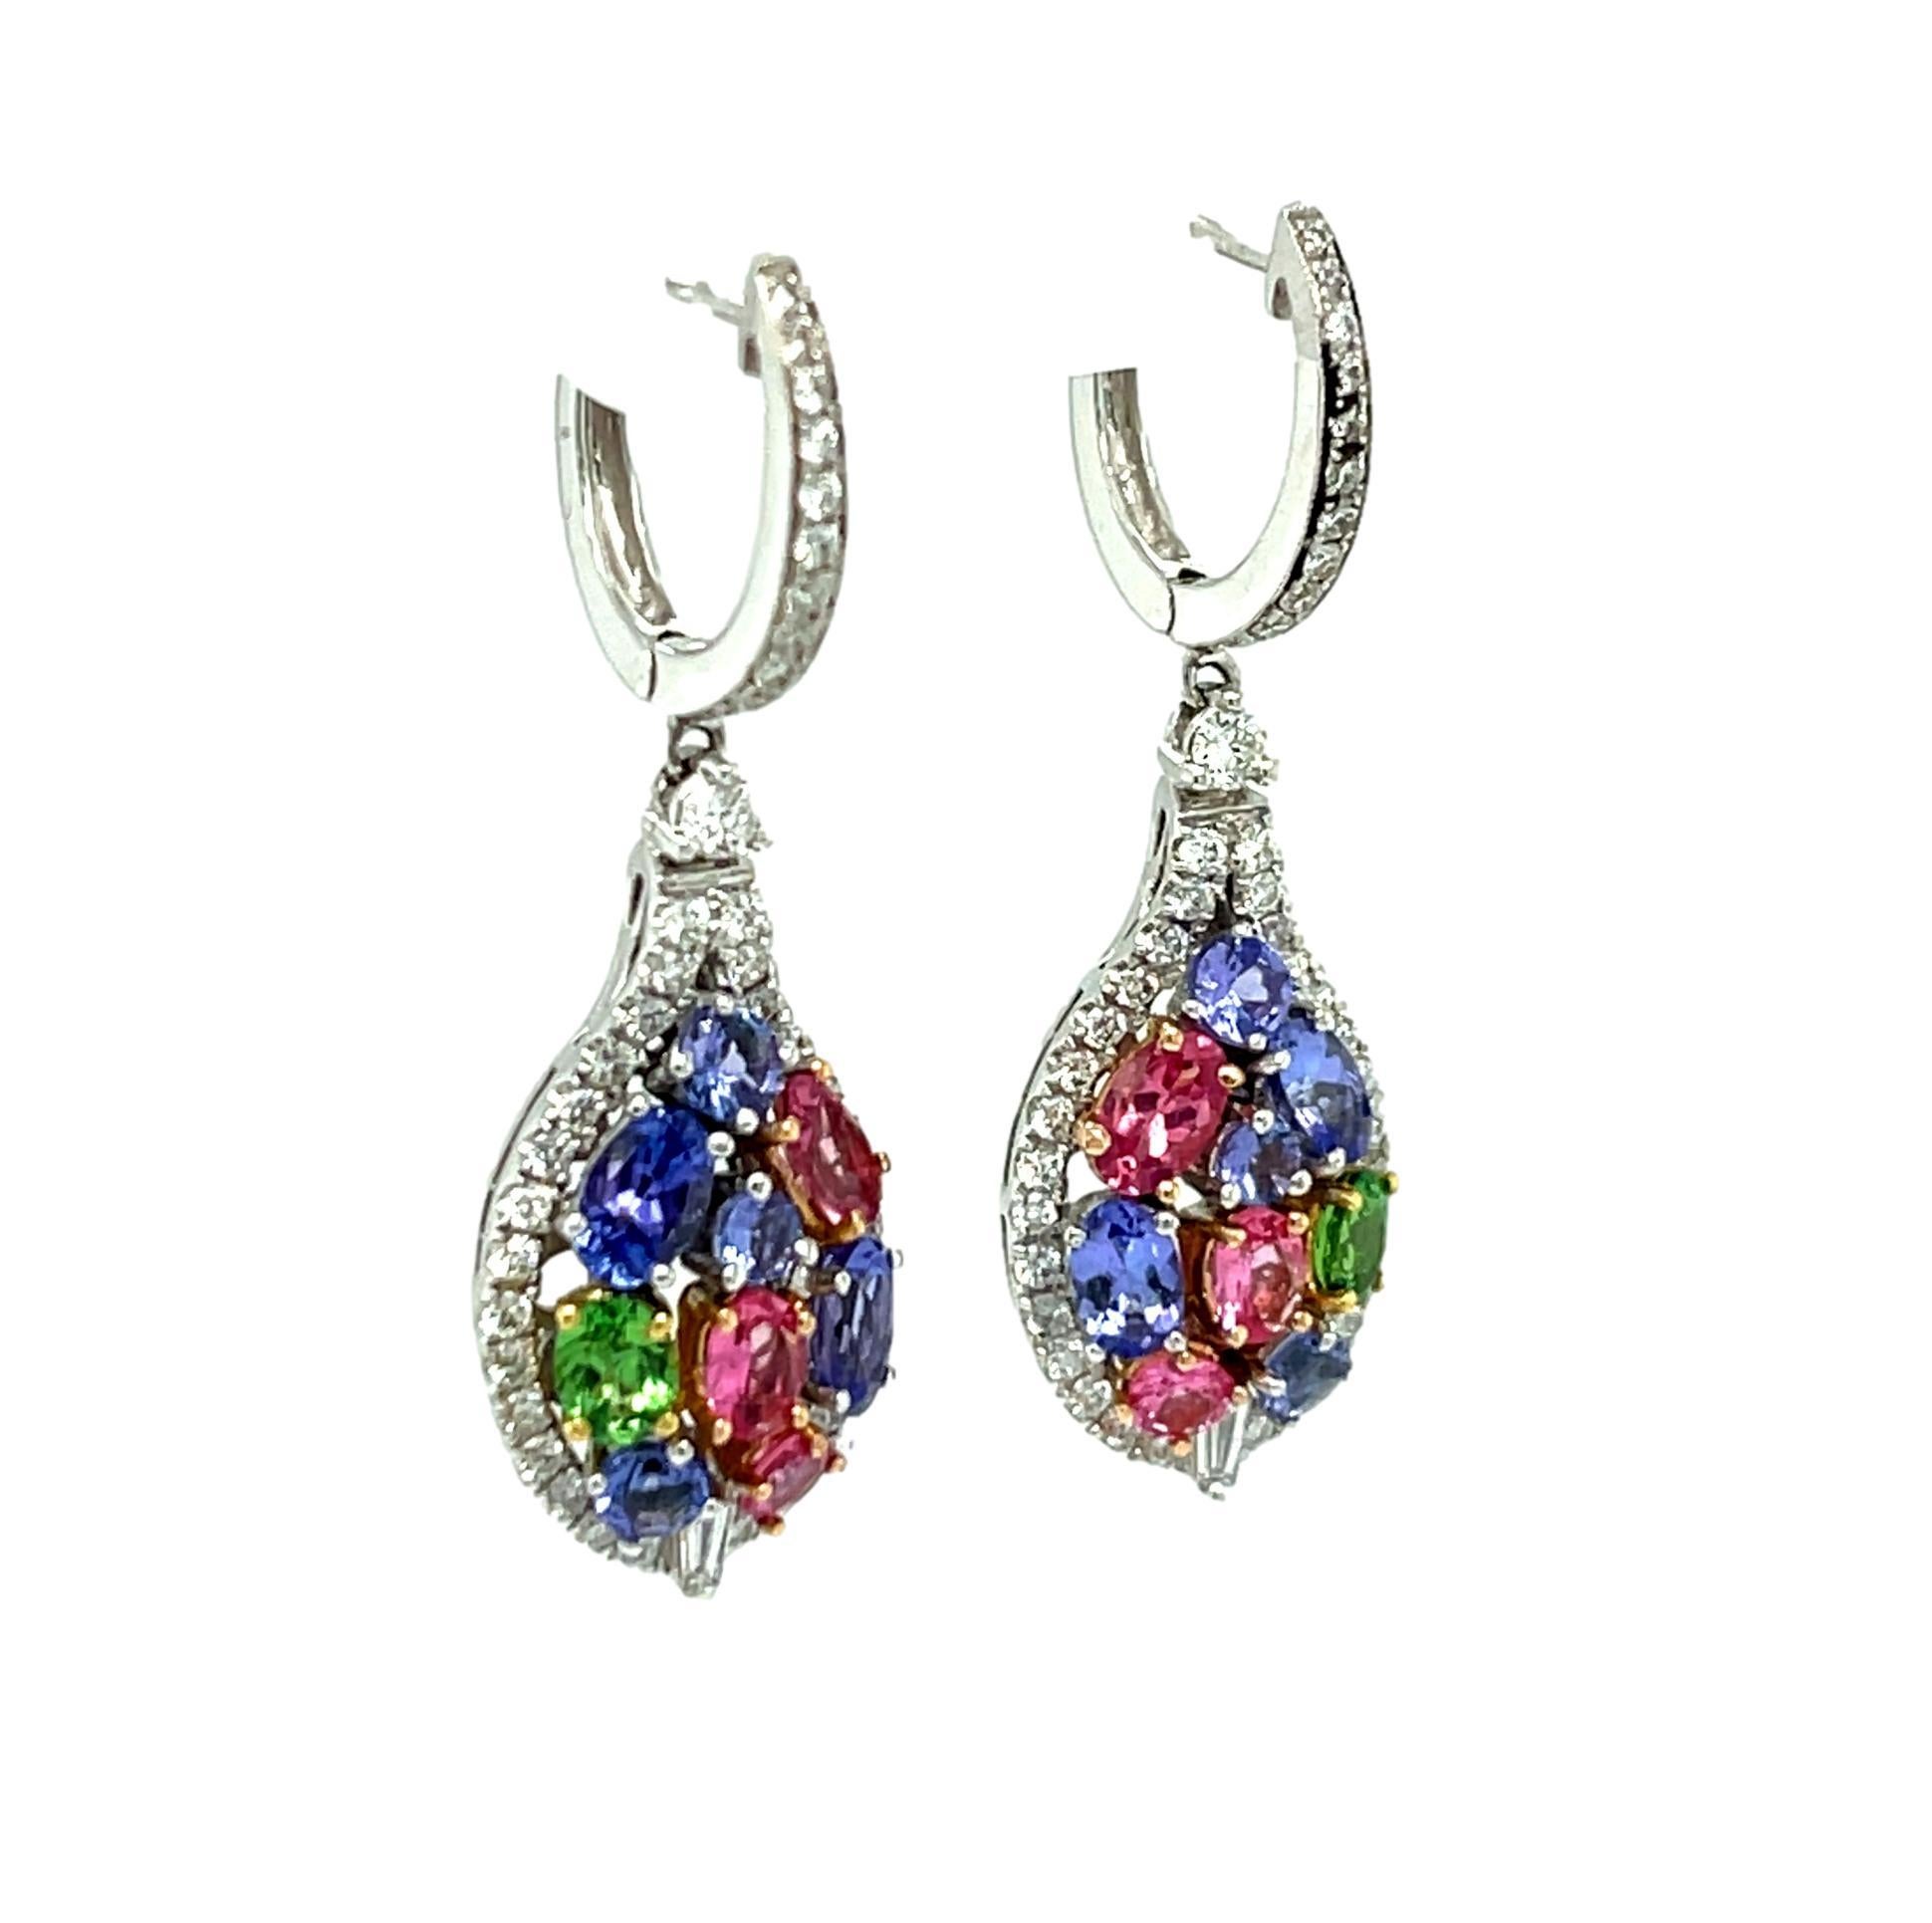 These stunning Drop and Dangle Diamond earrings have three fancy colored gemstones: Tsavorite, Tanzanite and Spinel all set in  18K white gold. There are 84 brilliant cut diamonds and 2 Baguette diamonds in this one of a kind earring. These vibrant